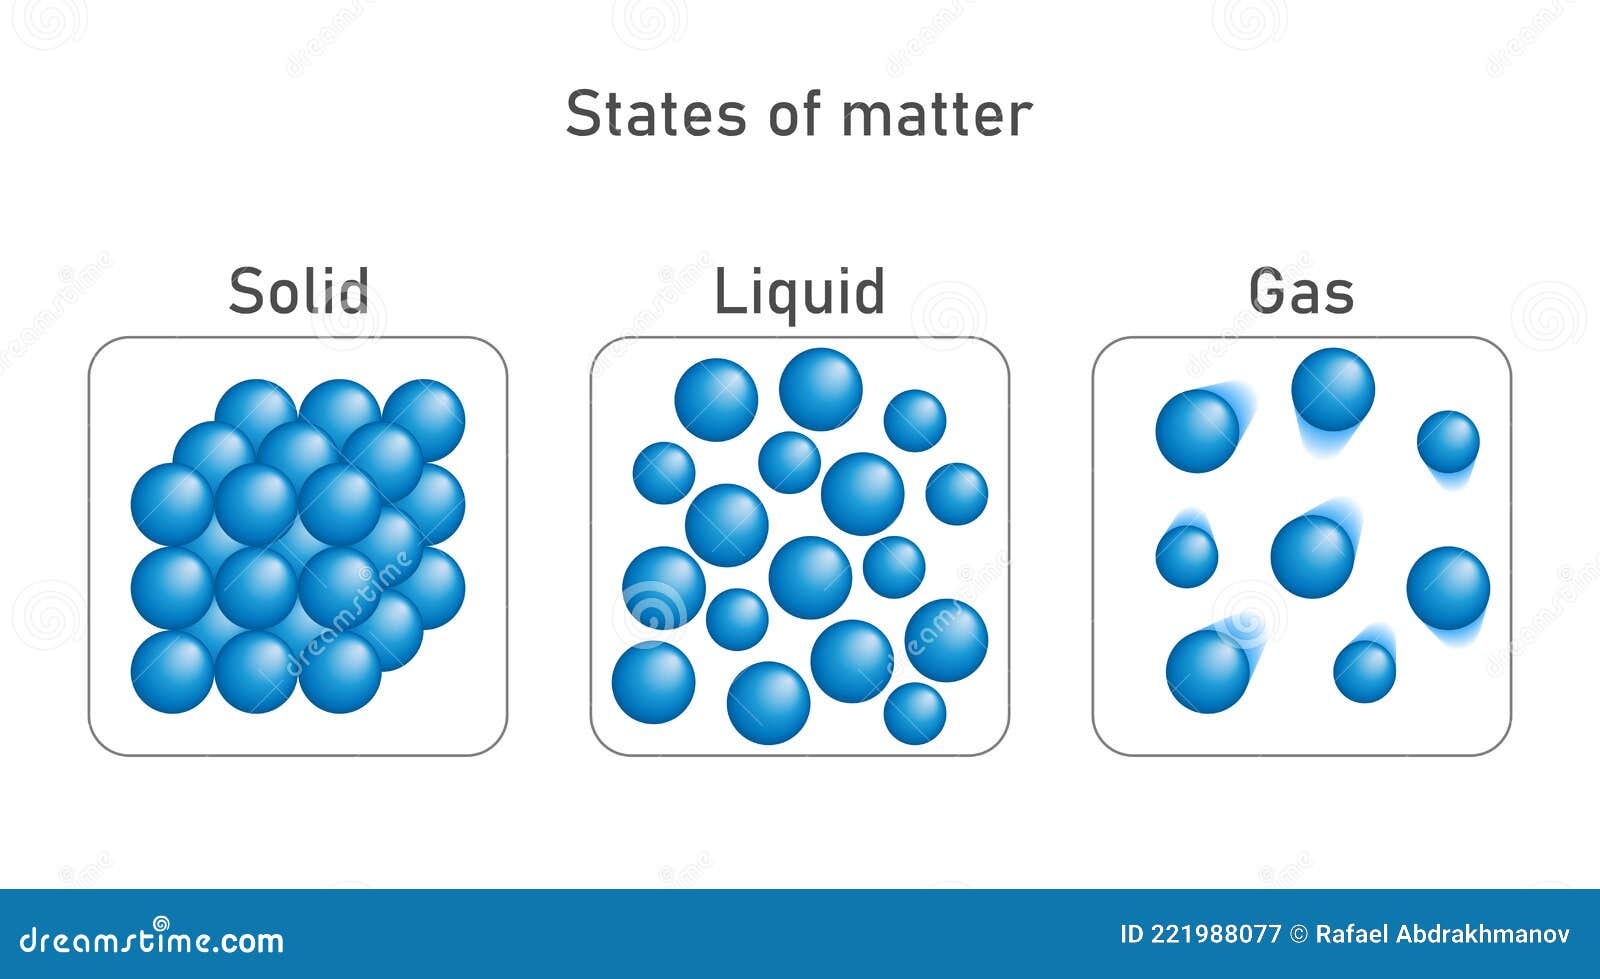 states-of-matter-solid-liquid-gas-worksheet-printable-and-distance